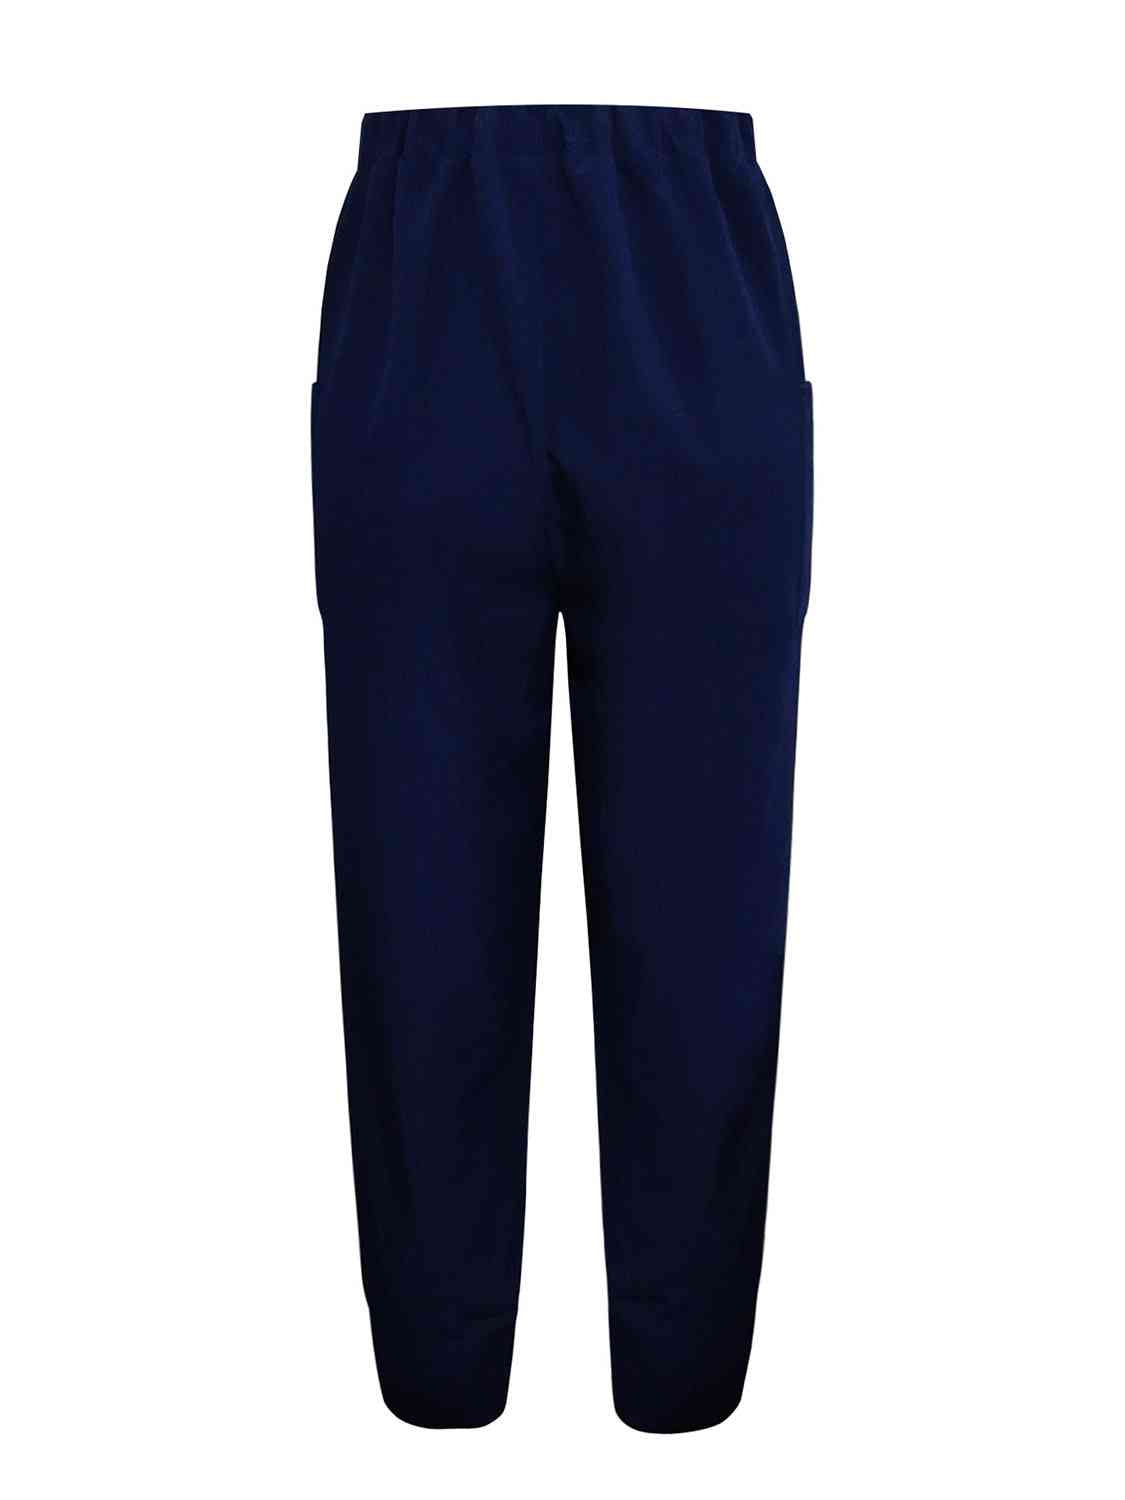 Blue Tie Front Pants with Pockets